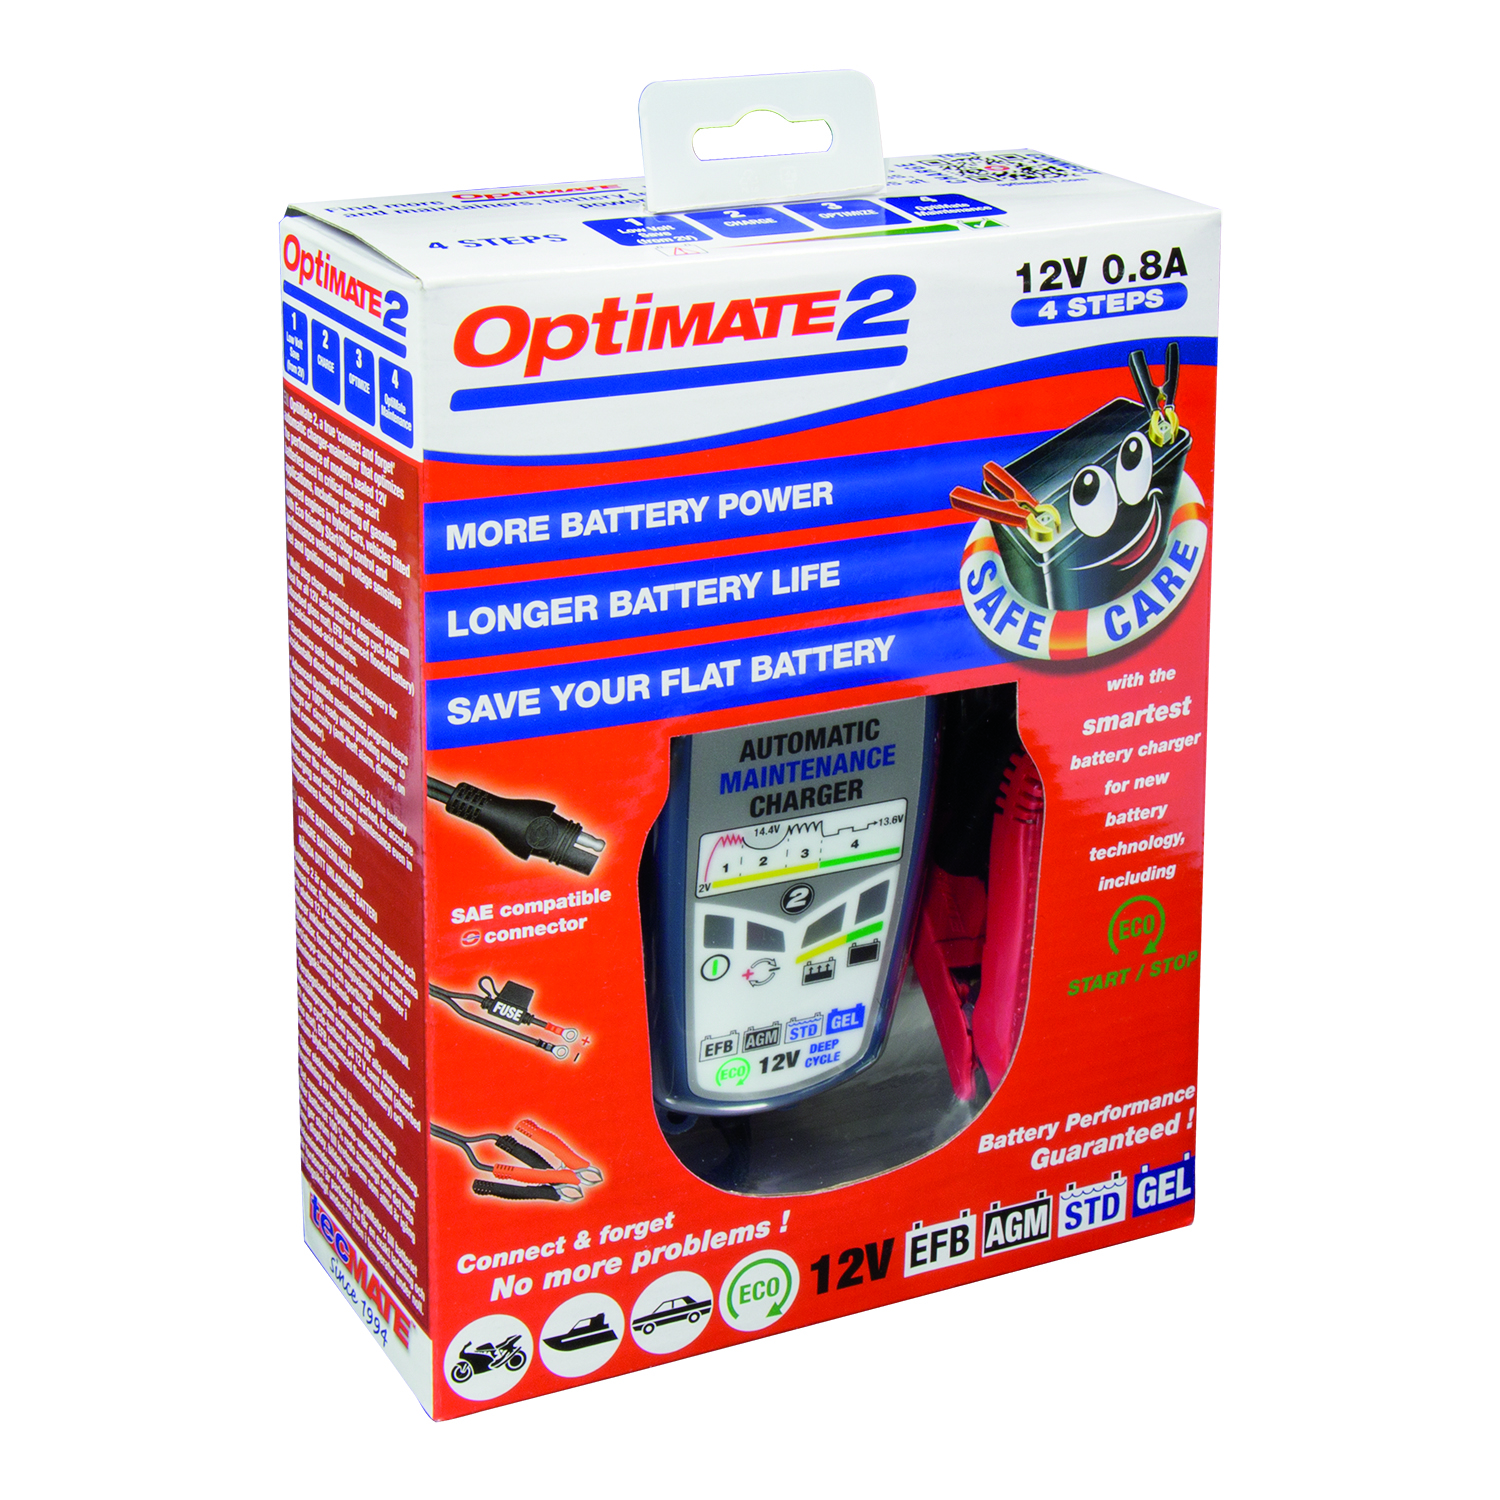 OptiMate 2 Battery Charger UK Supplier & Warranty 2019 NEW